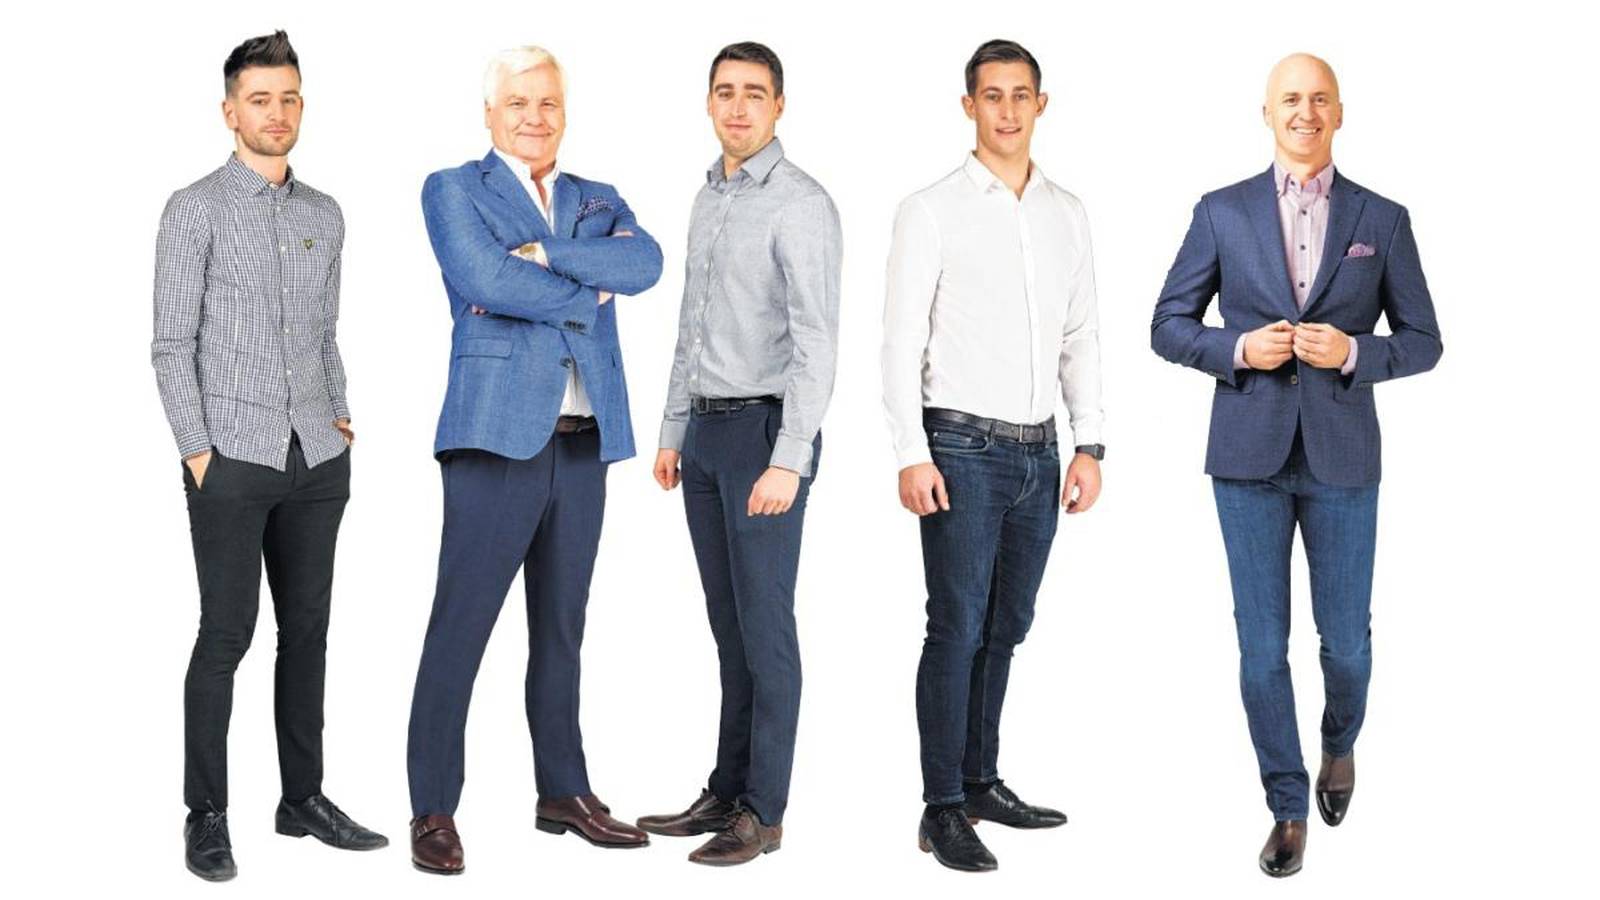 Men at work: 7 tips to nail tricky office dress codes – The Irish Times